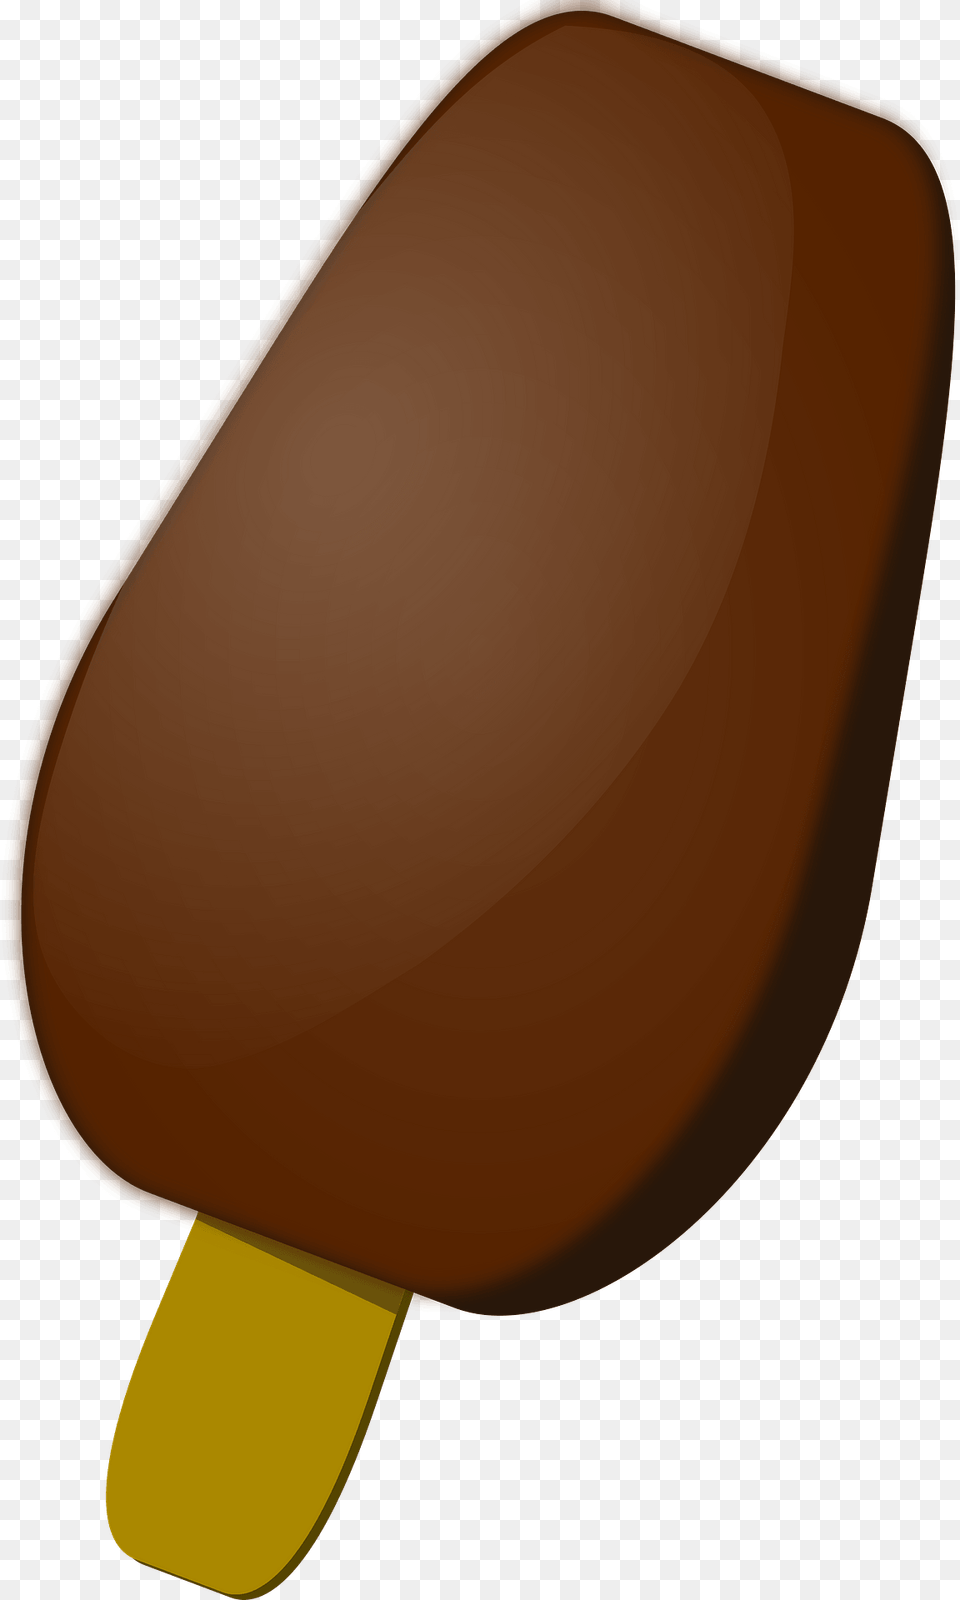 Chocolate Covered Ice Cream On A Stick Clipart, Dessert, Food, Ice Cream, Ice Pop Free Transparent Png